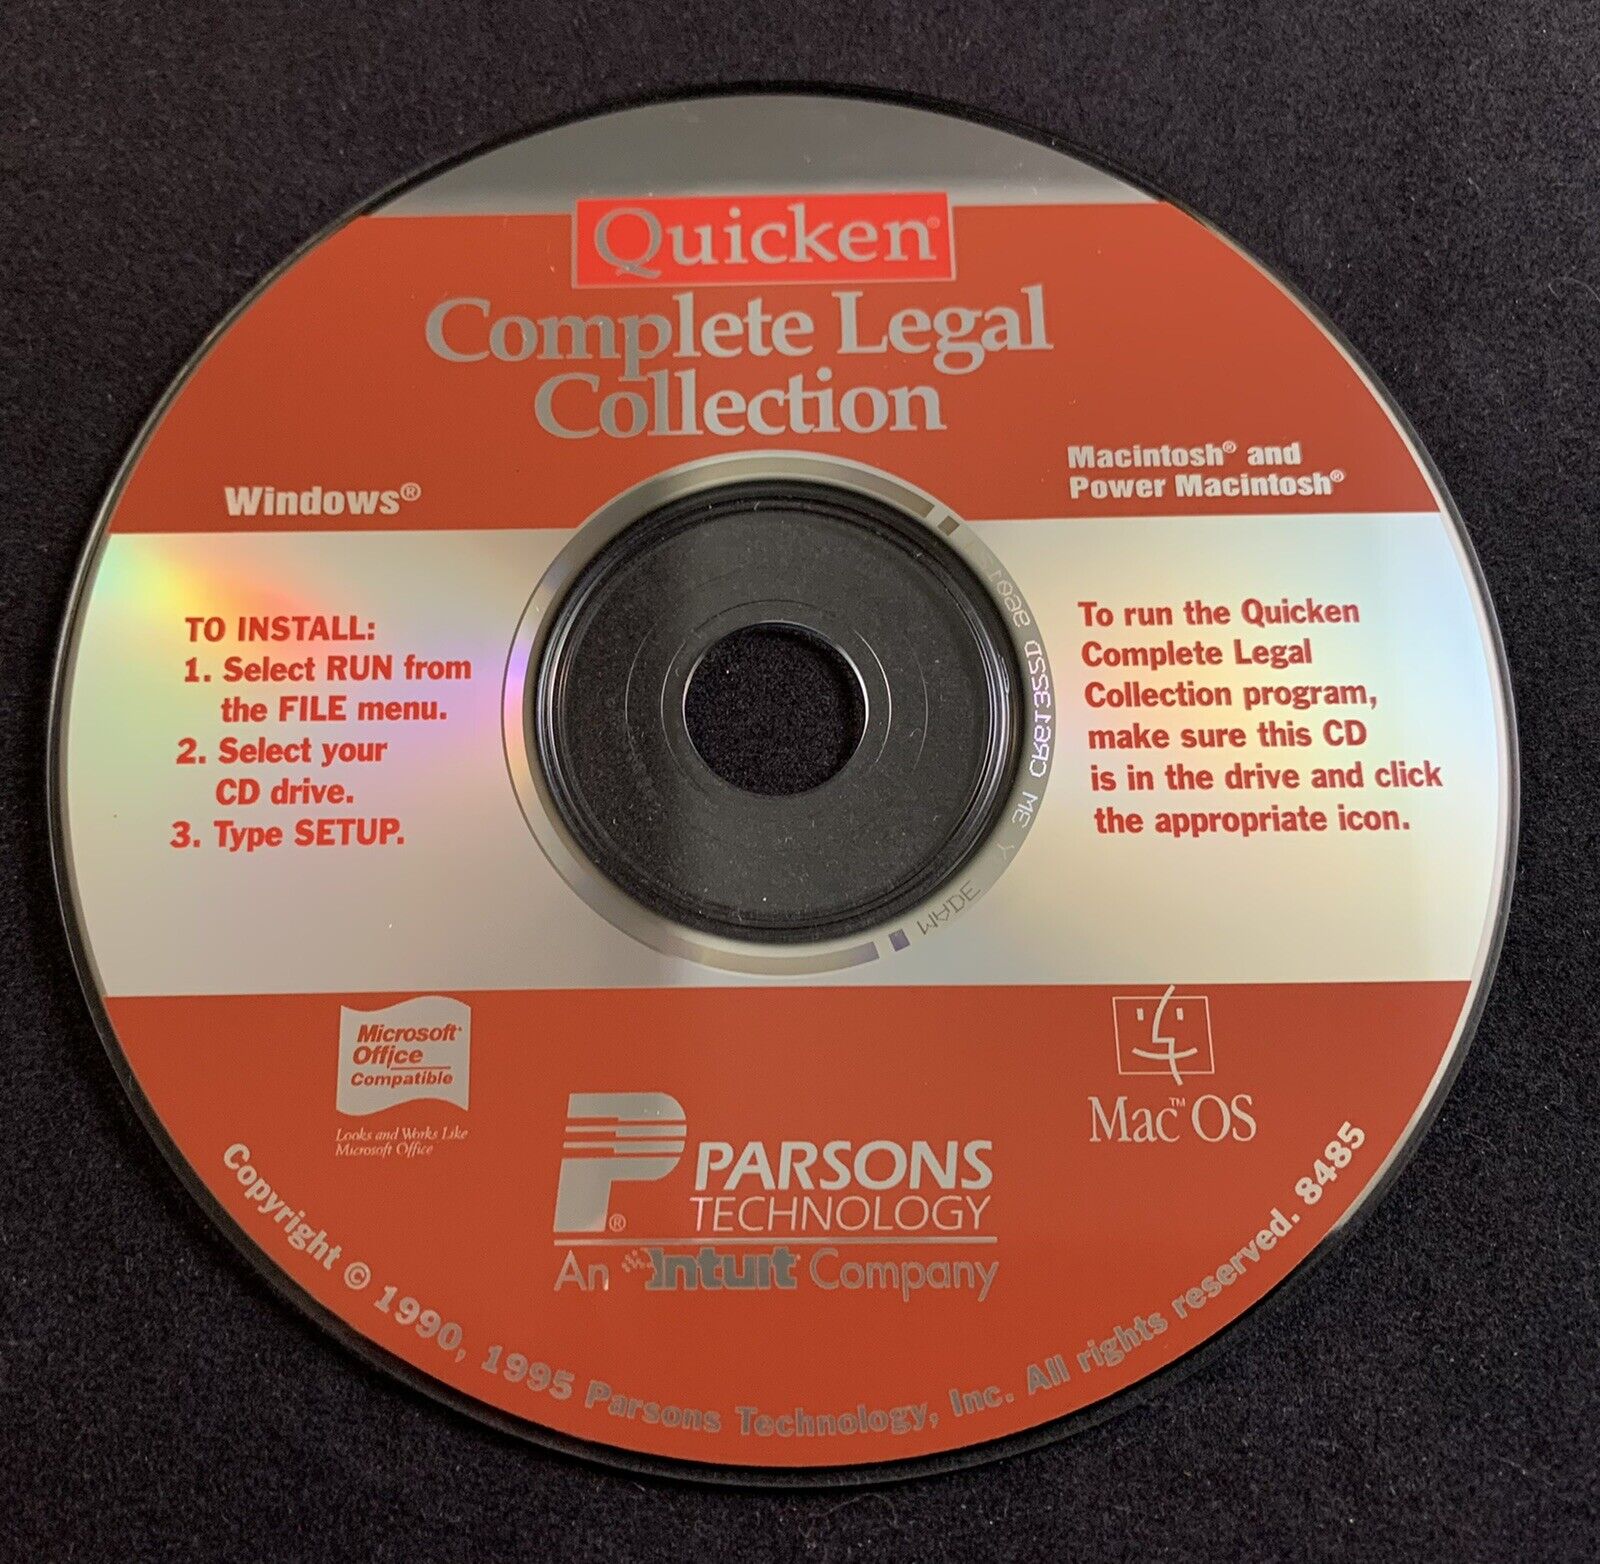 Quicken Complete Legal Collection Windows & Macintosh CD-ROM (1995)